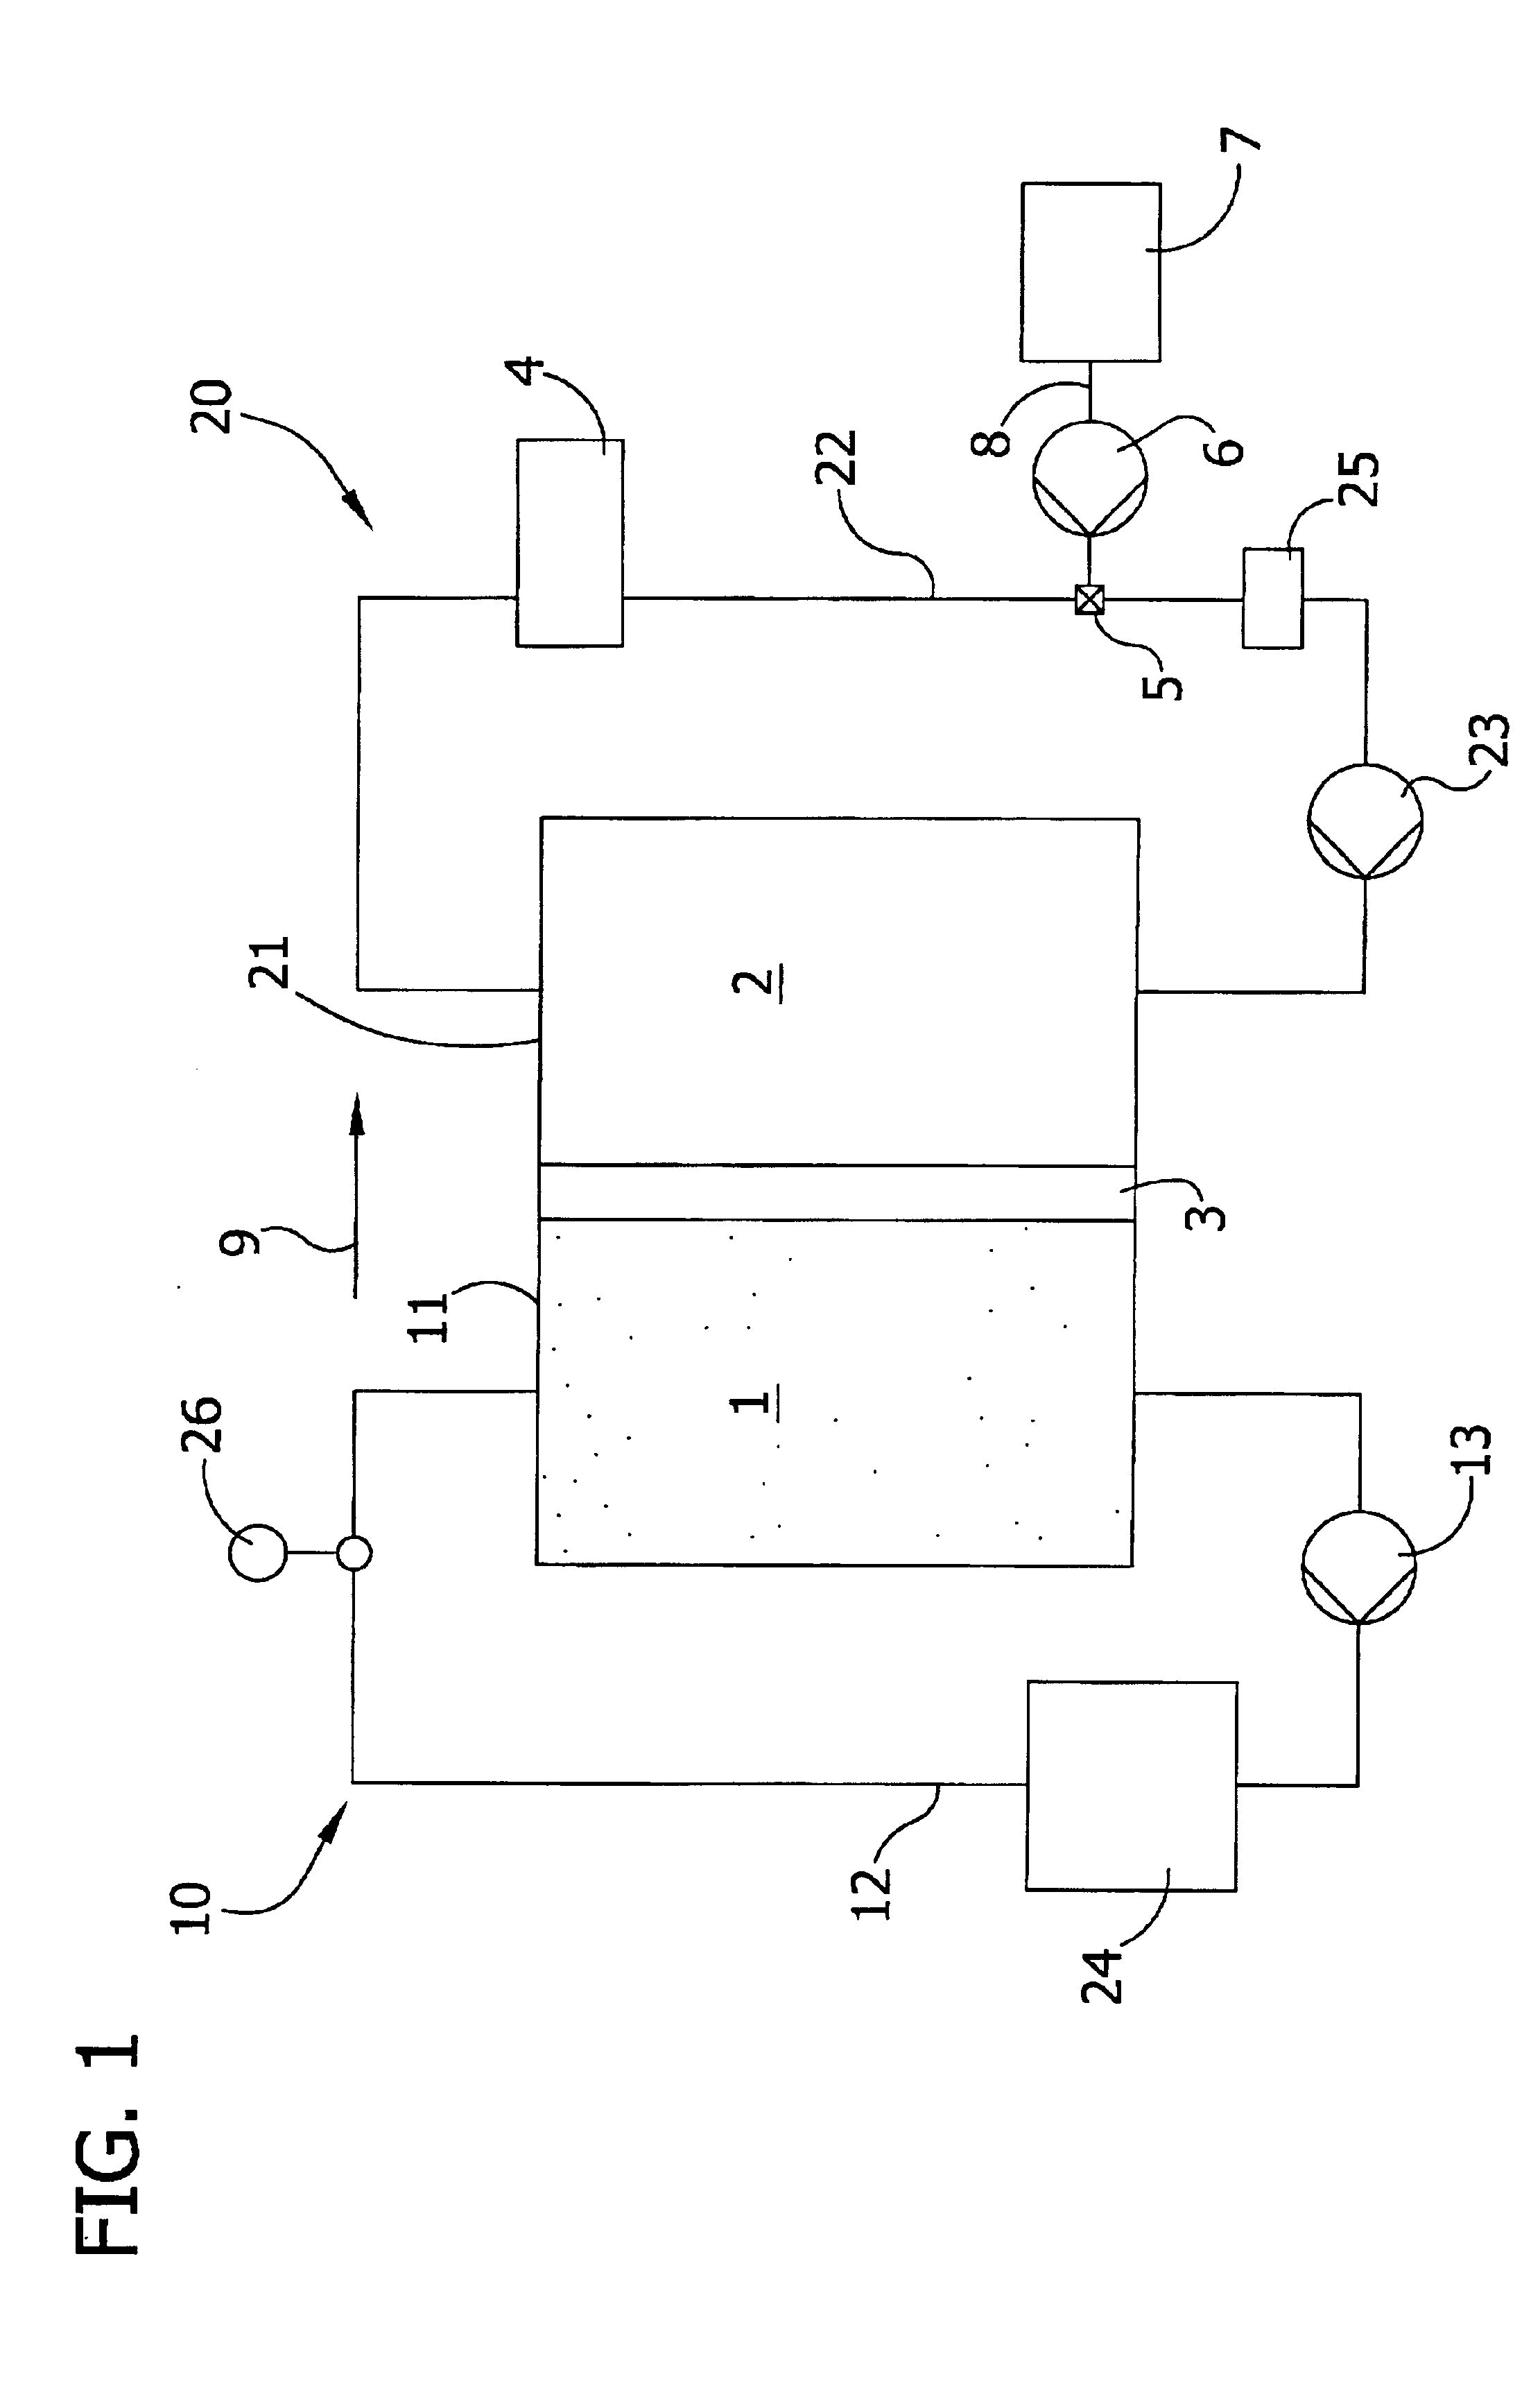 Method and apparatus of purifying an electrolyte